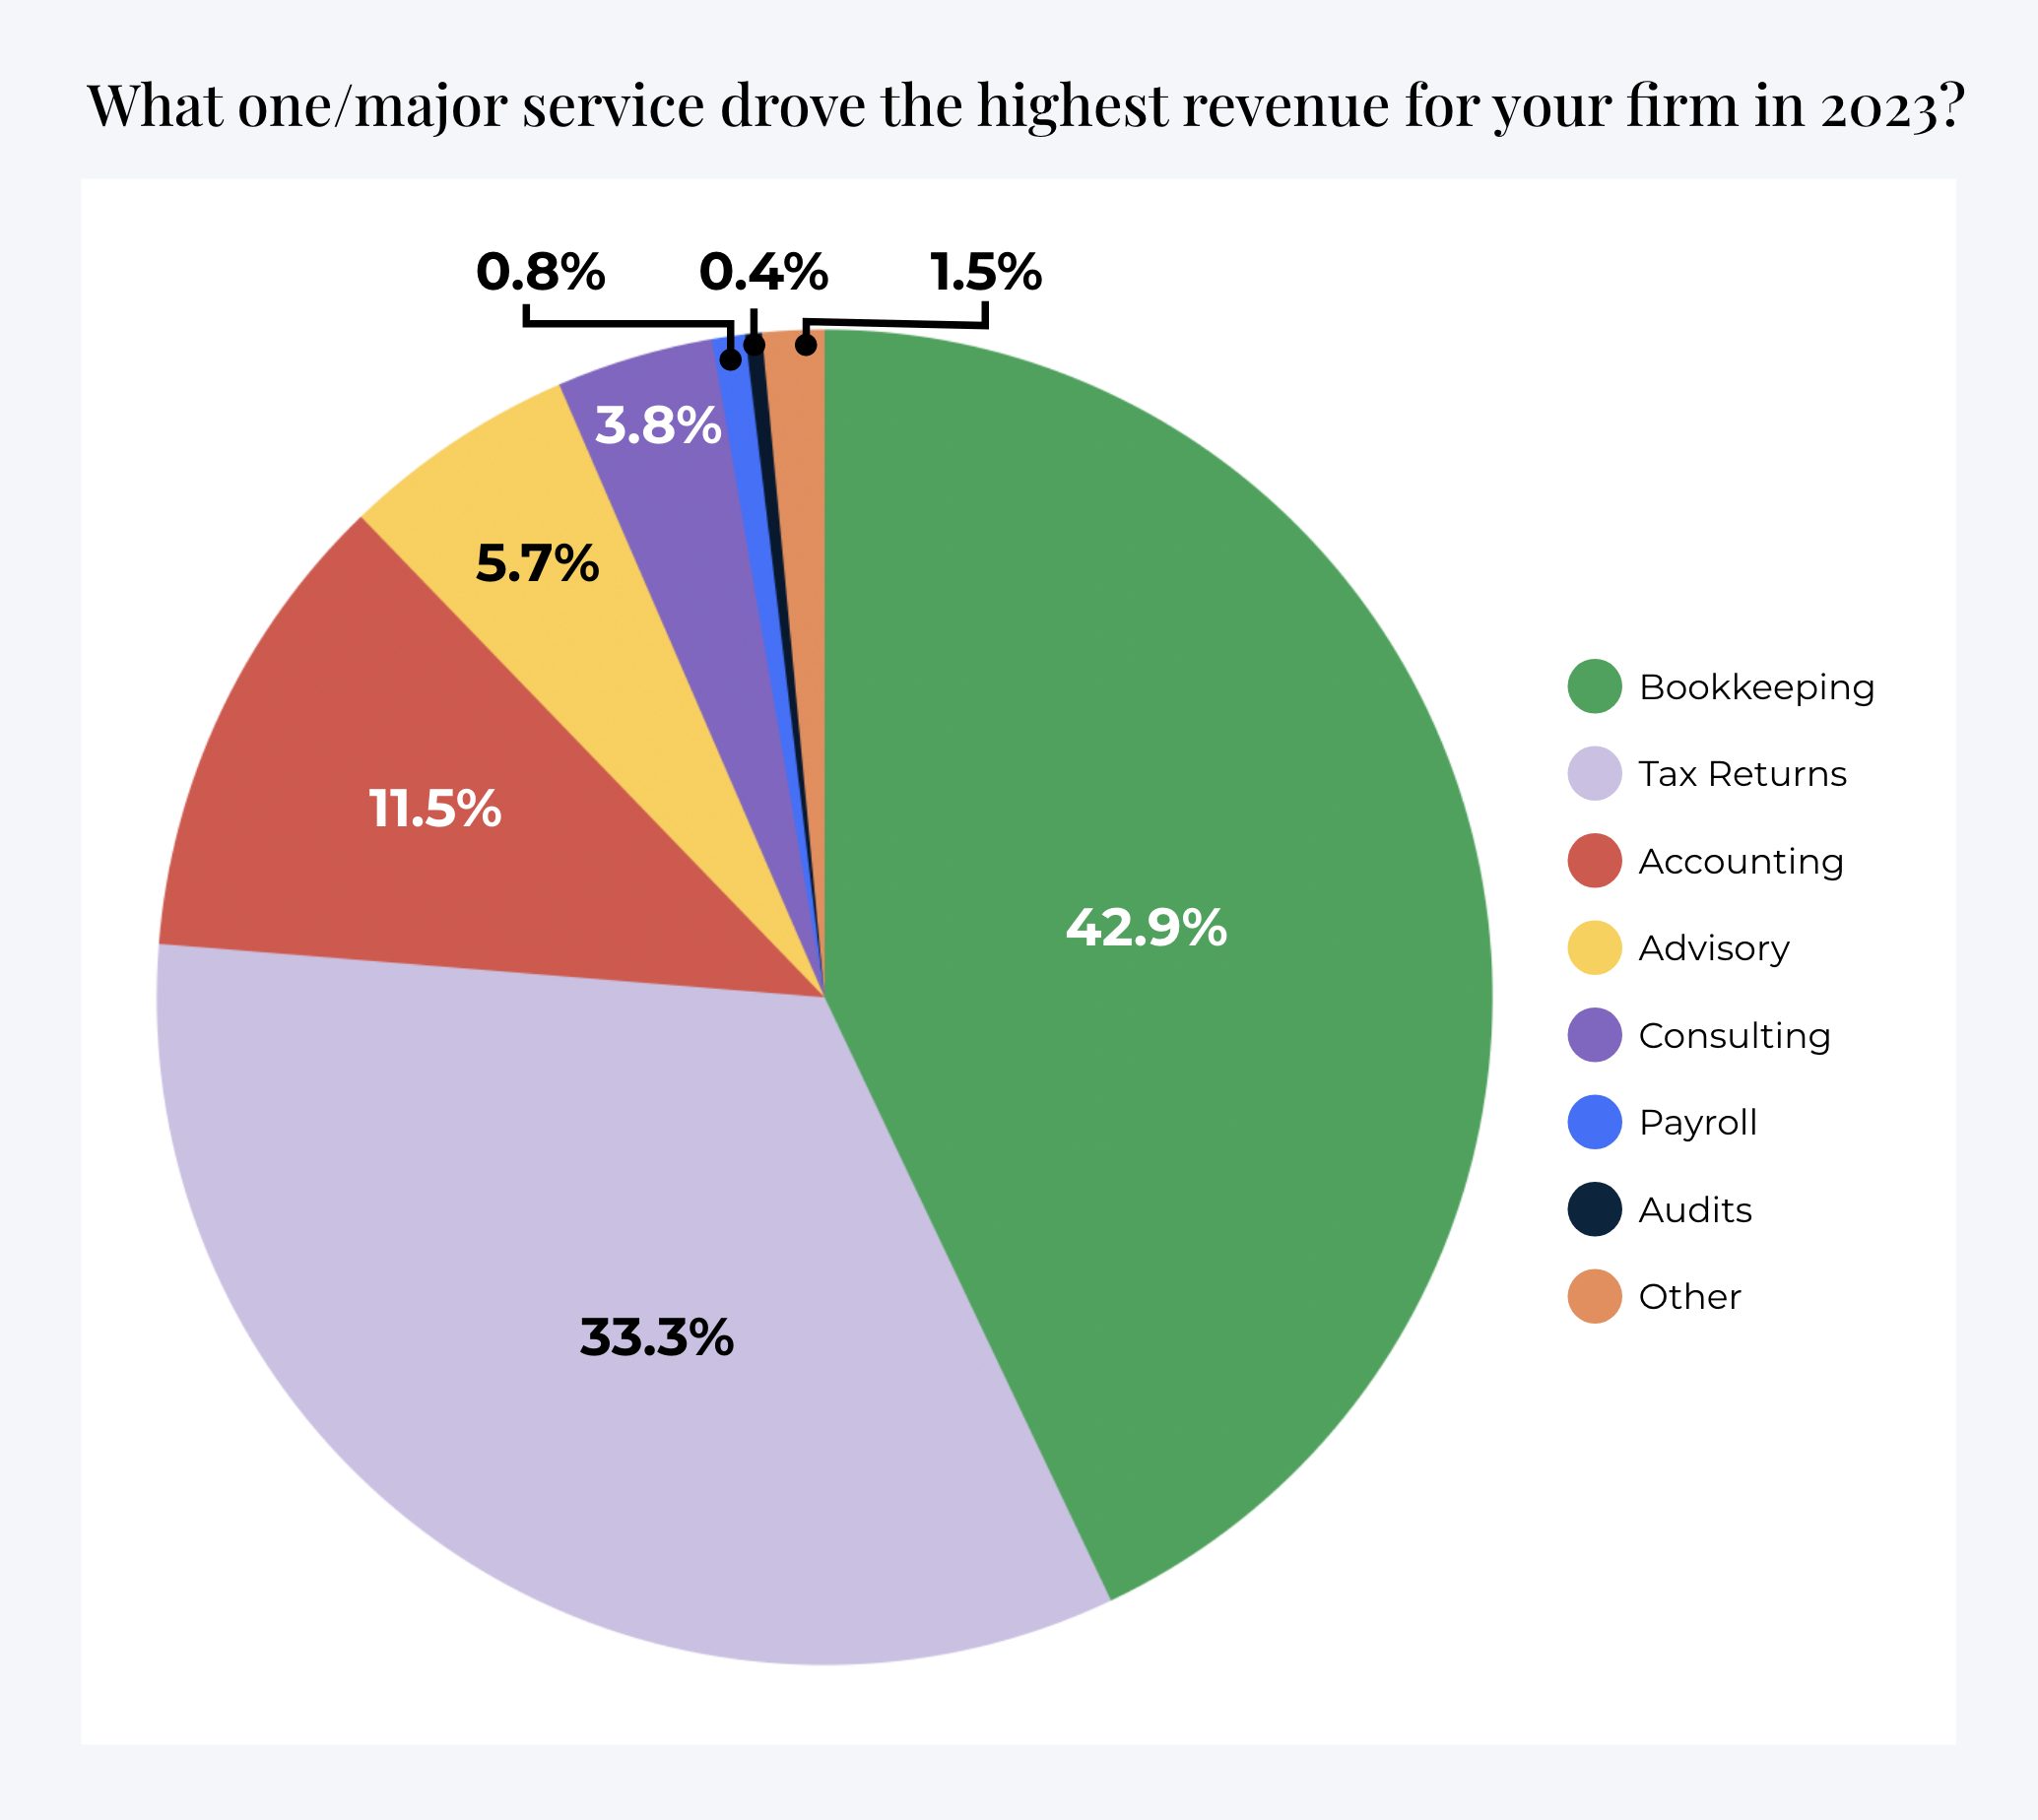 services that drove the highest revenues for accounting and bookkeeping firms in 2023